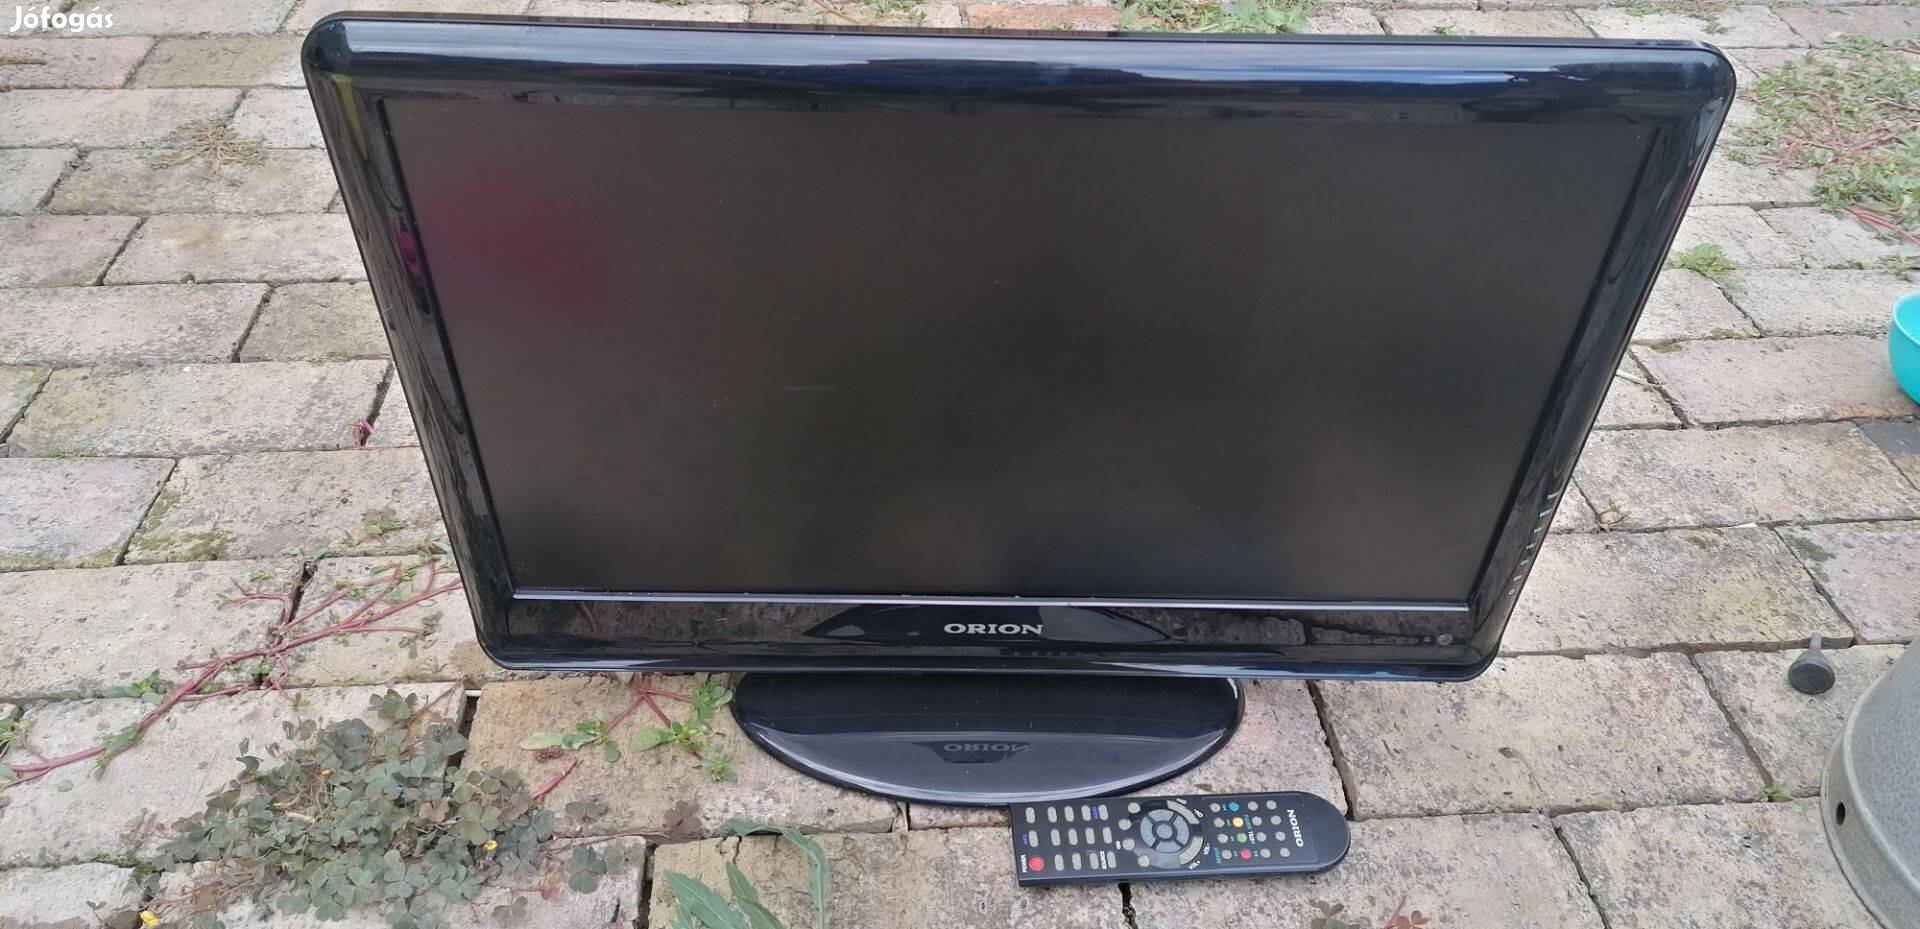 Orion lcd tv távval